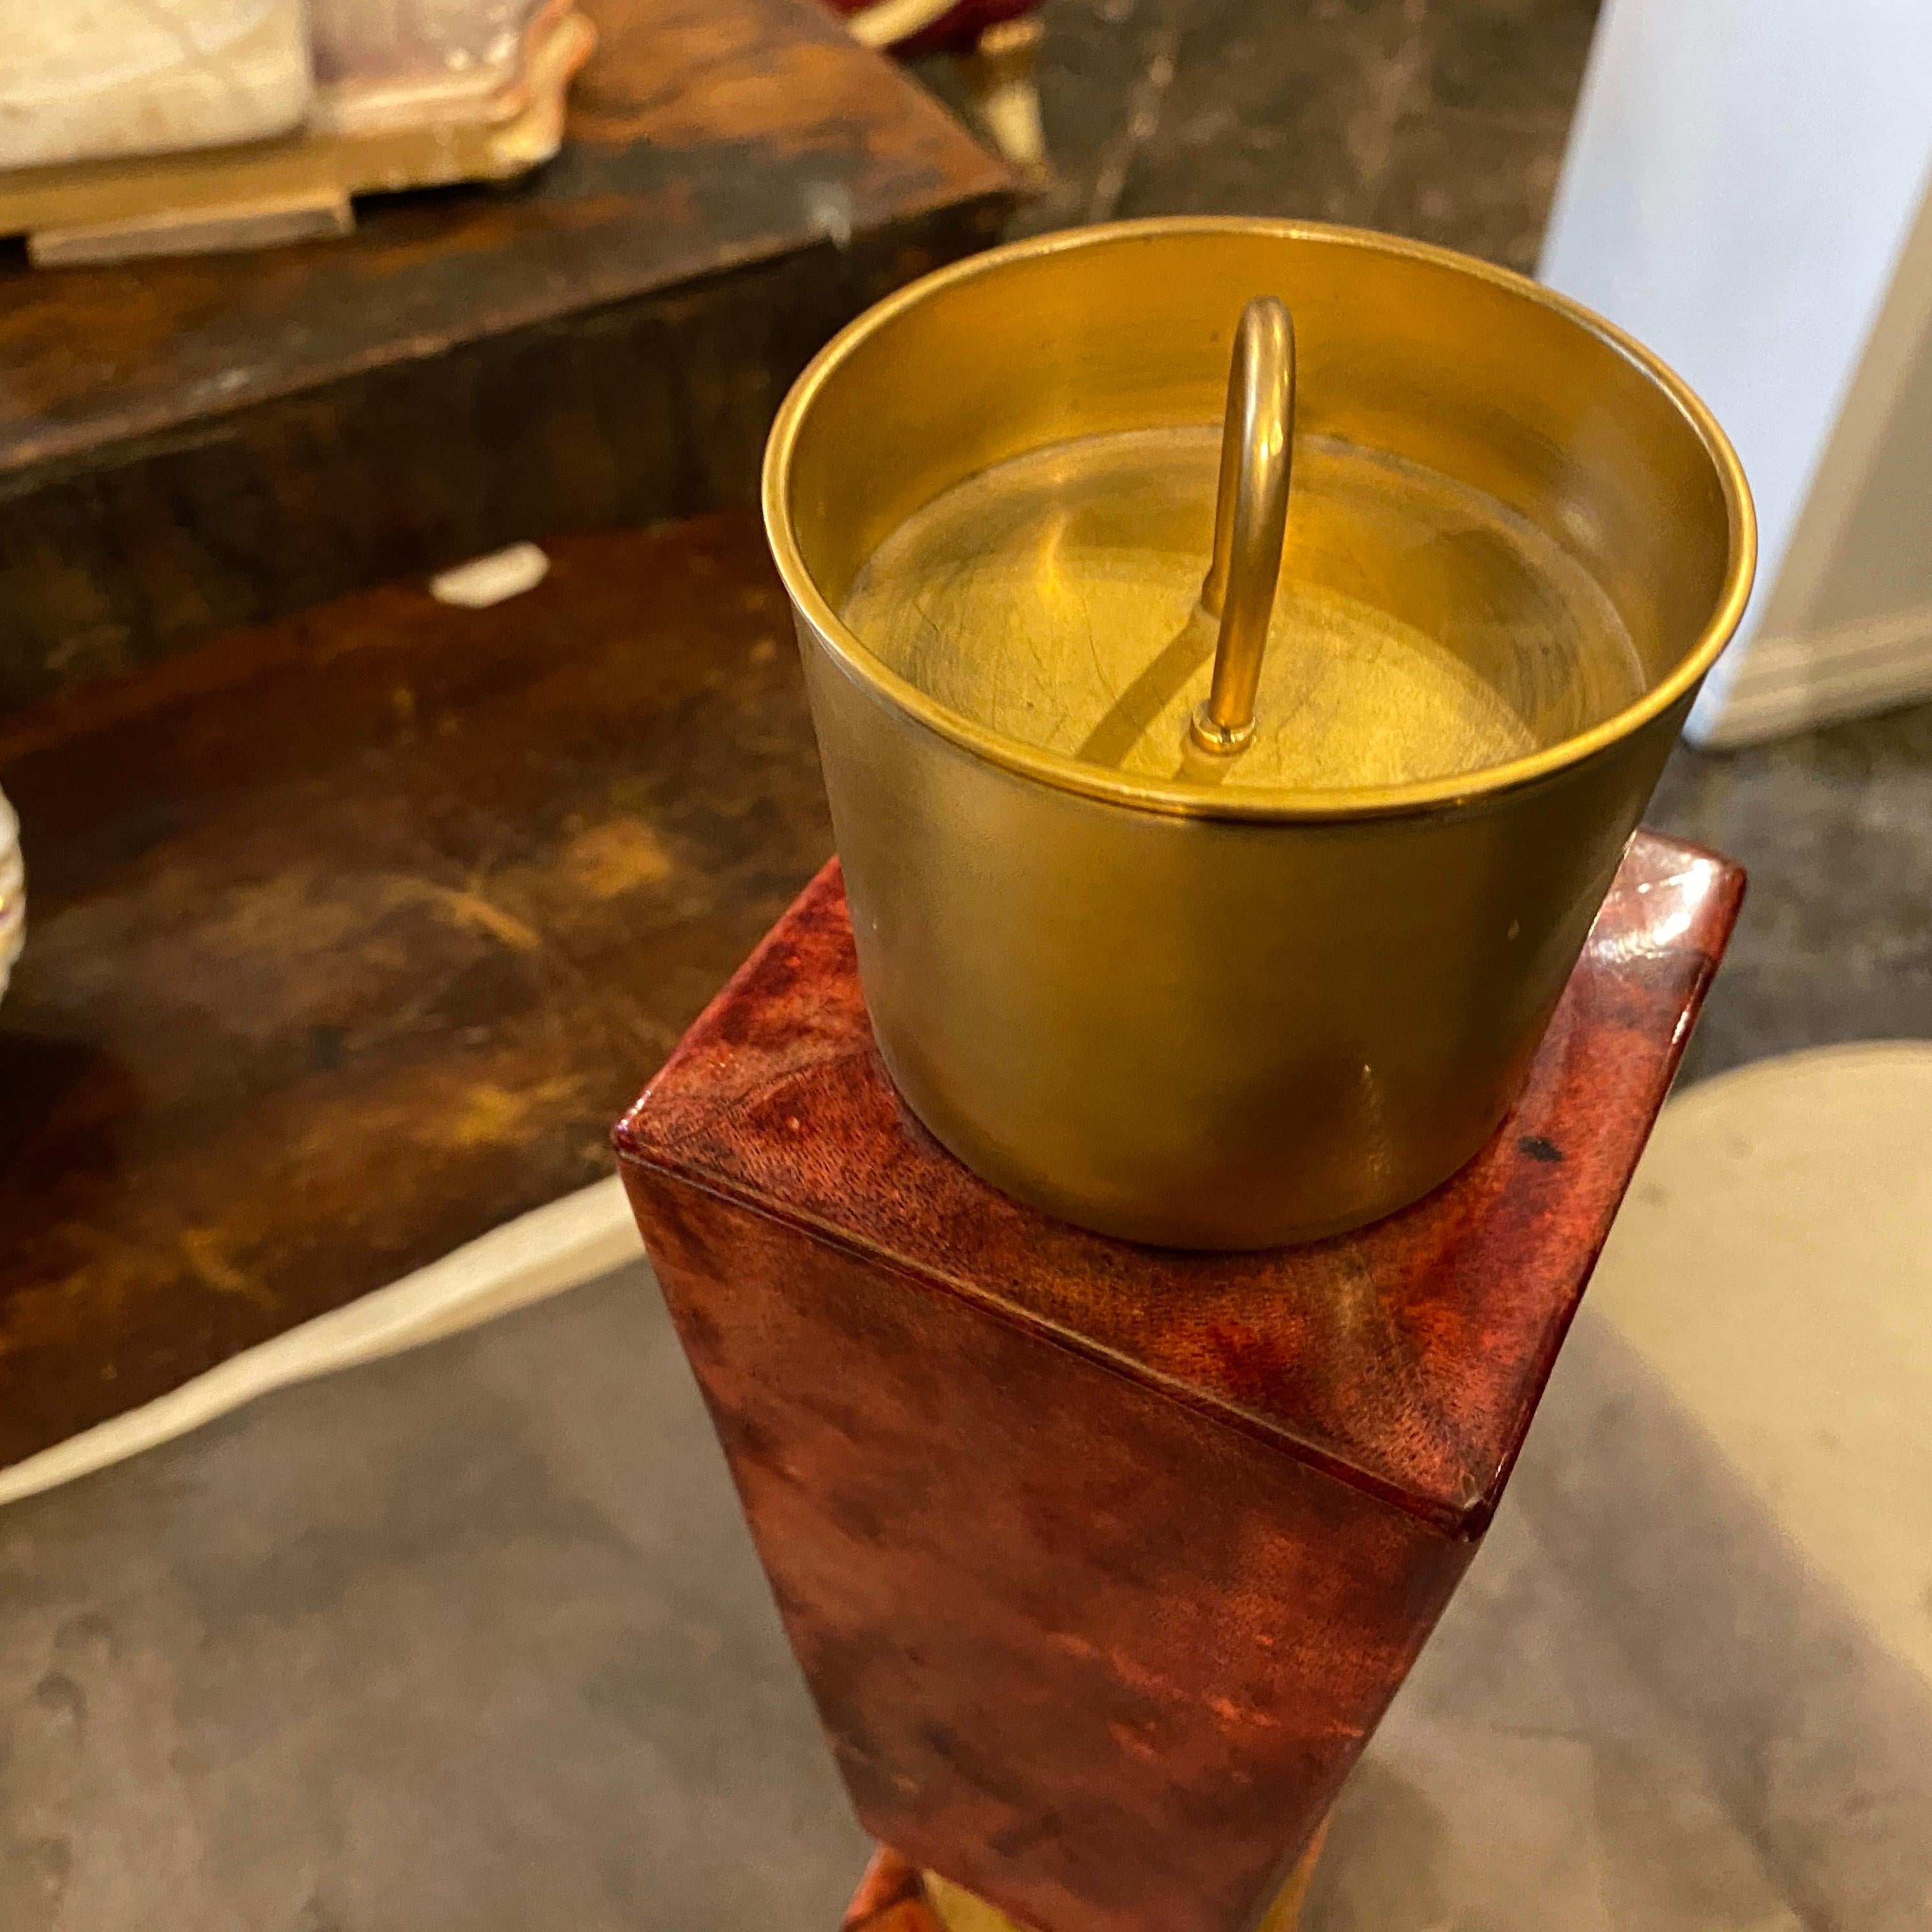 A Mid-Century Modern Italian Shaker designed and manufactured by Aldo Tura, red goatskin and brass are in original conditions, it's probably never used.